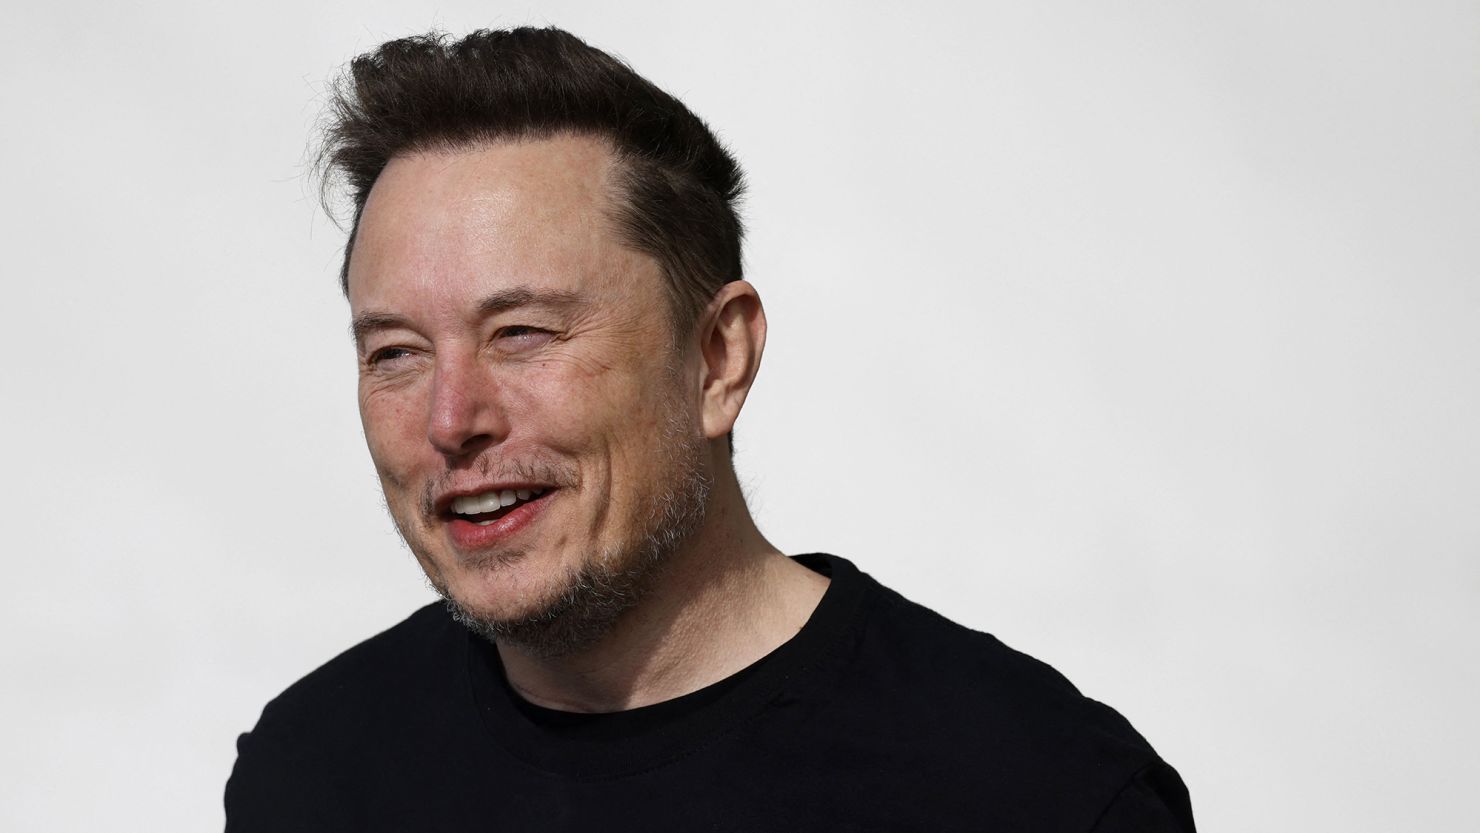 Tesla CEO Elon Musk discussed his use of the medication ketamine to treat his depression in an interview with journalist Don Lemon.